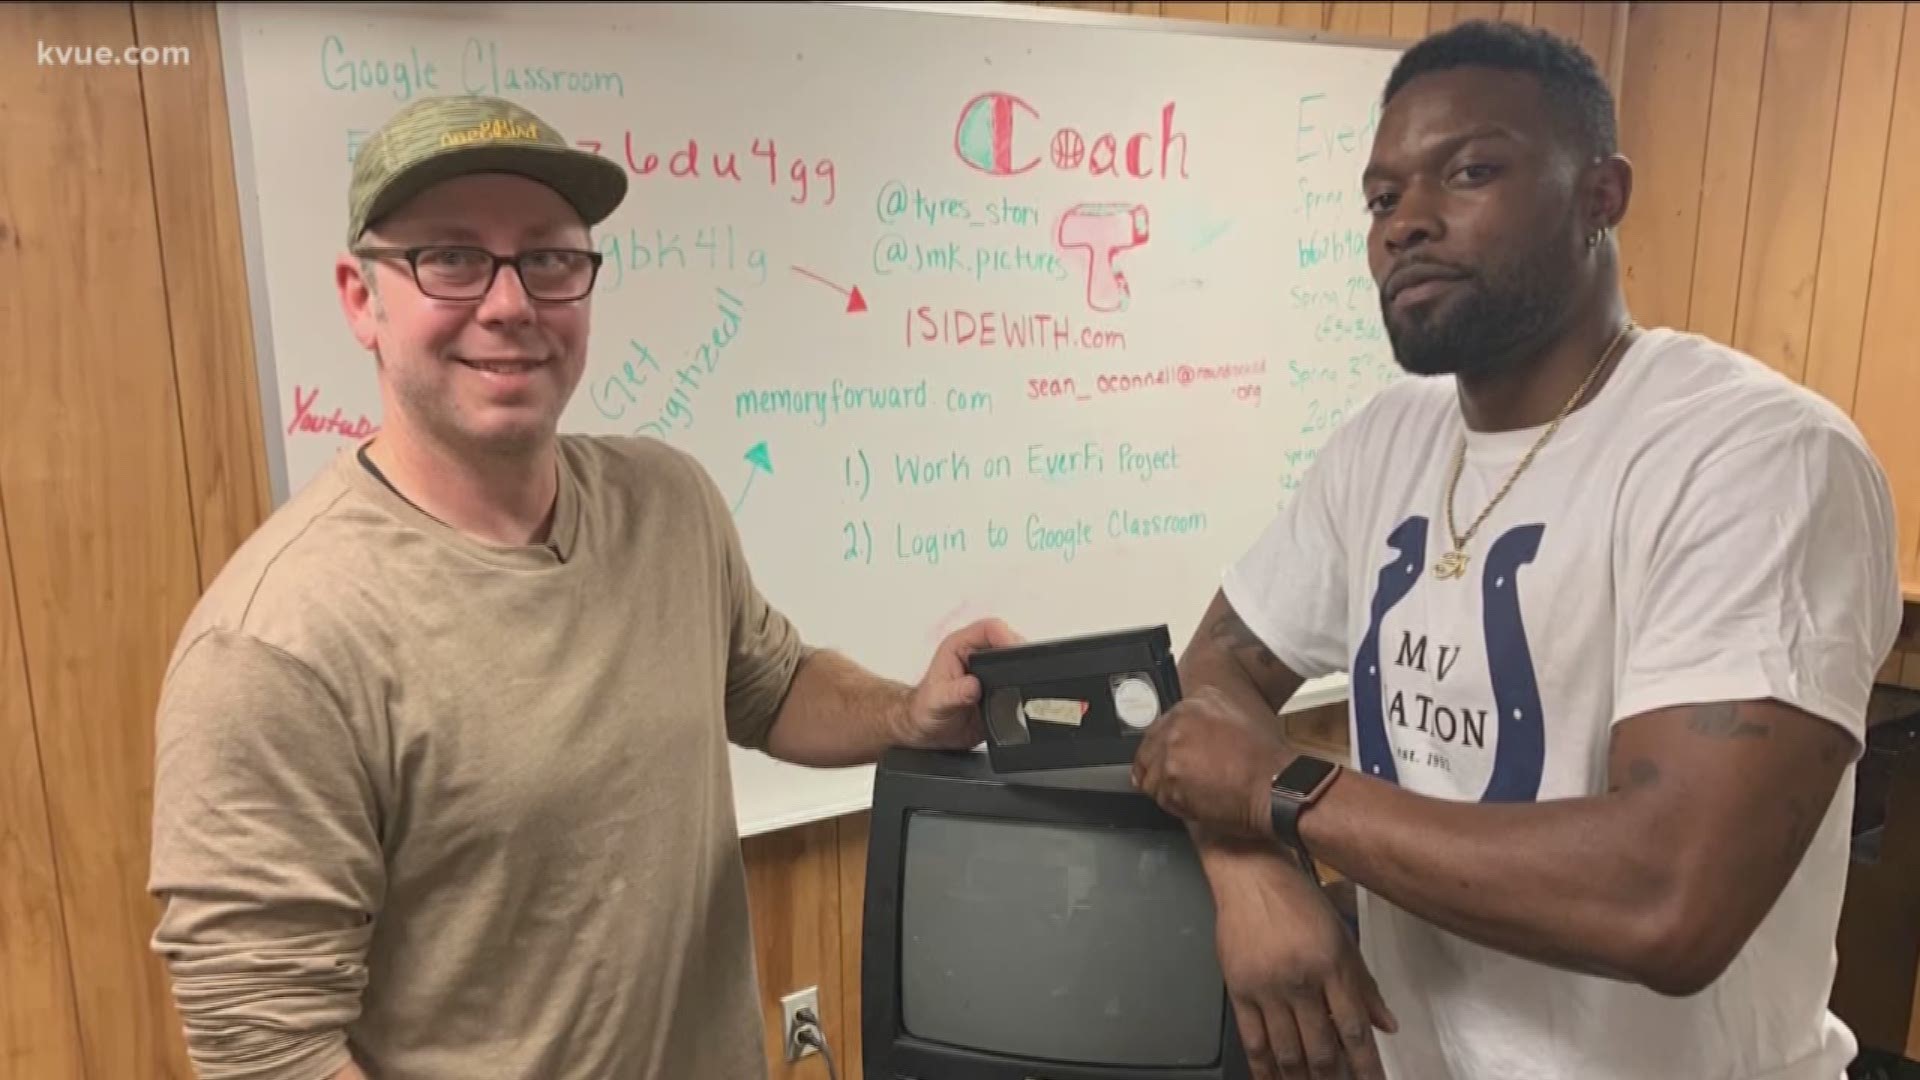 An Austin man found a home movie on a tape in a VCR he got from Goodwill and made it his mission to find the tape's rightful owner.